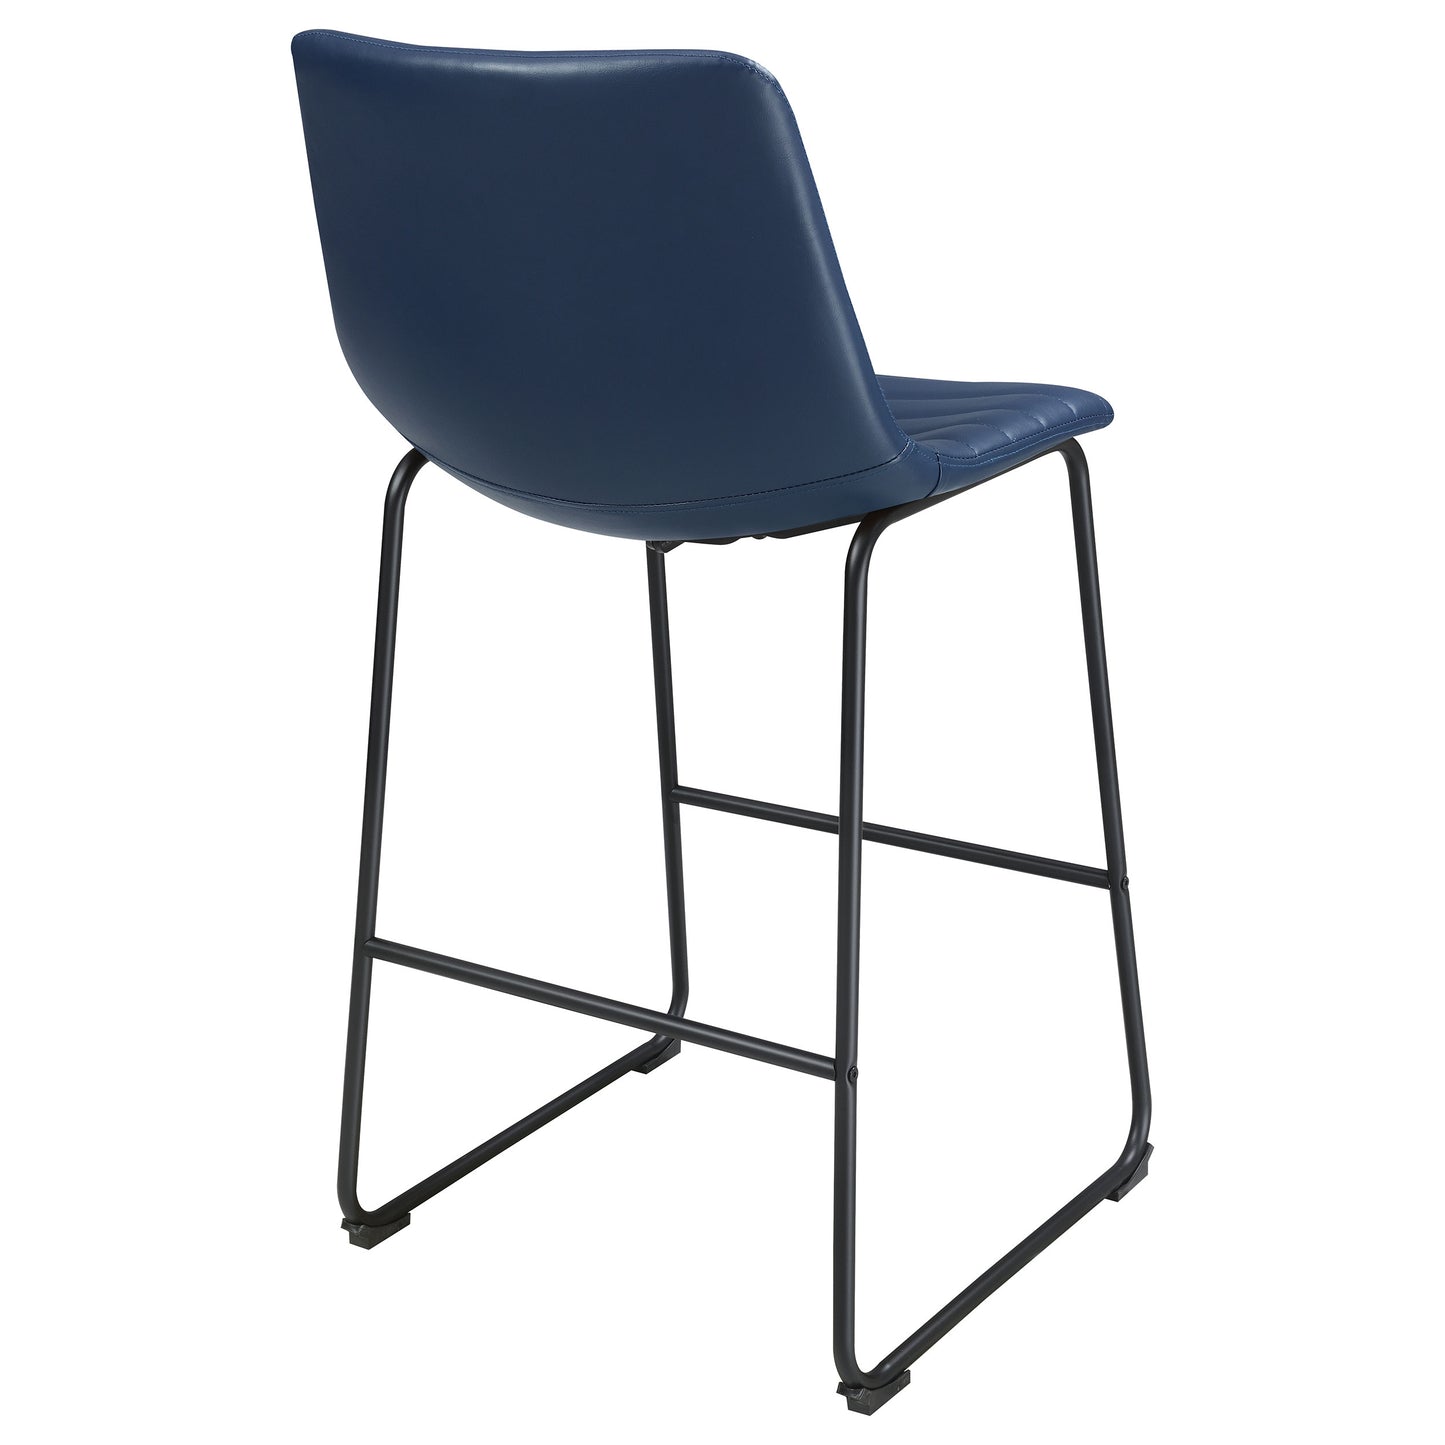 Zuni Faux Leather Upholstered Bar Chair Blue (Set of 2)